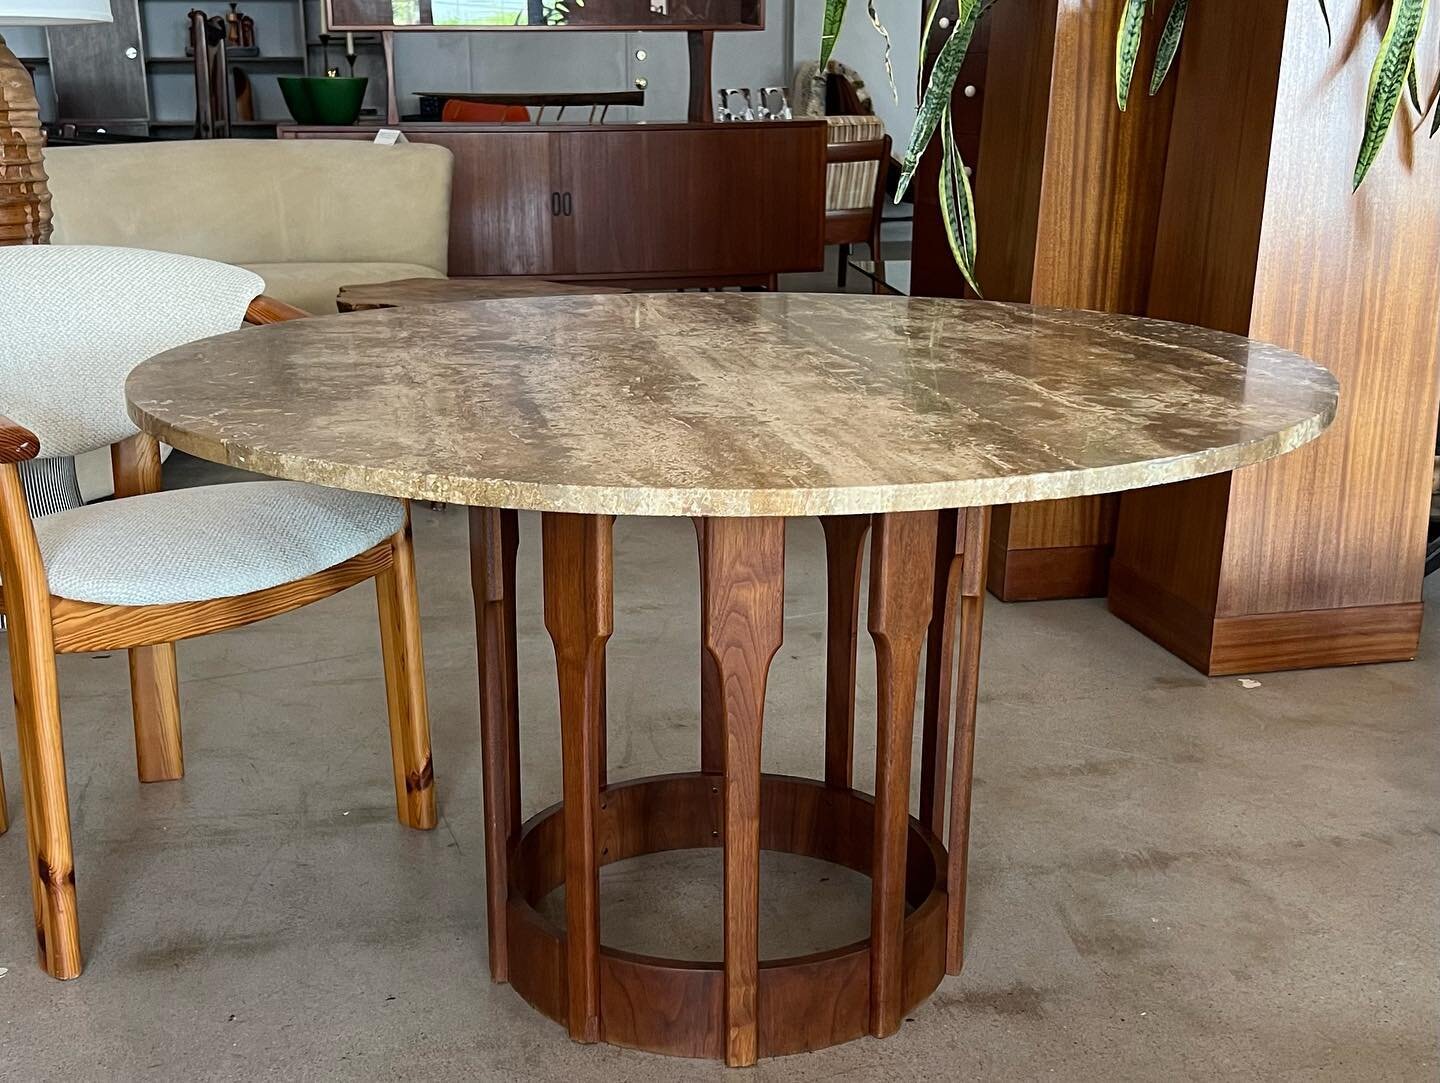 Available
.
.
Fantastic travertine top and walnut base dining table c. 1960s. Often attributed to Harvey Probber, but it&rsquo;s designed by John Keal for Brown Saltman. Either way, we love the modern form of the base and this is some of the pretties